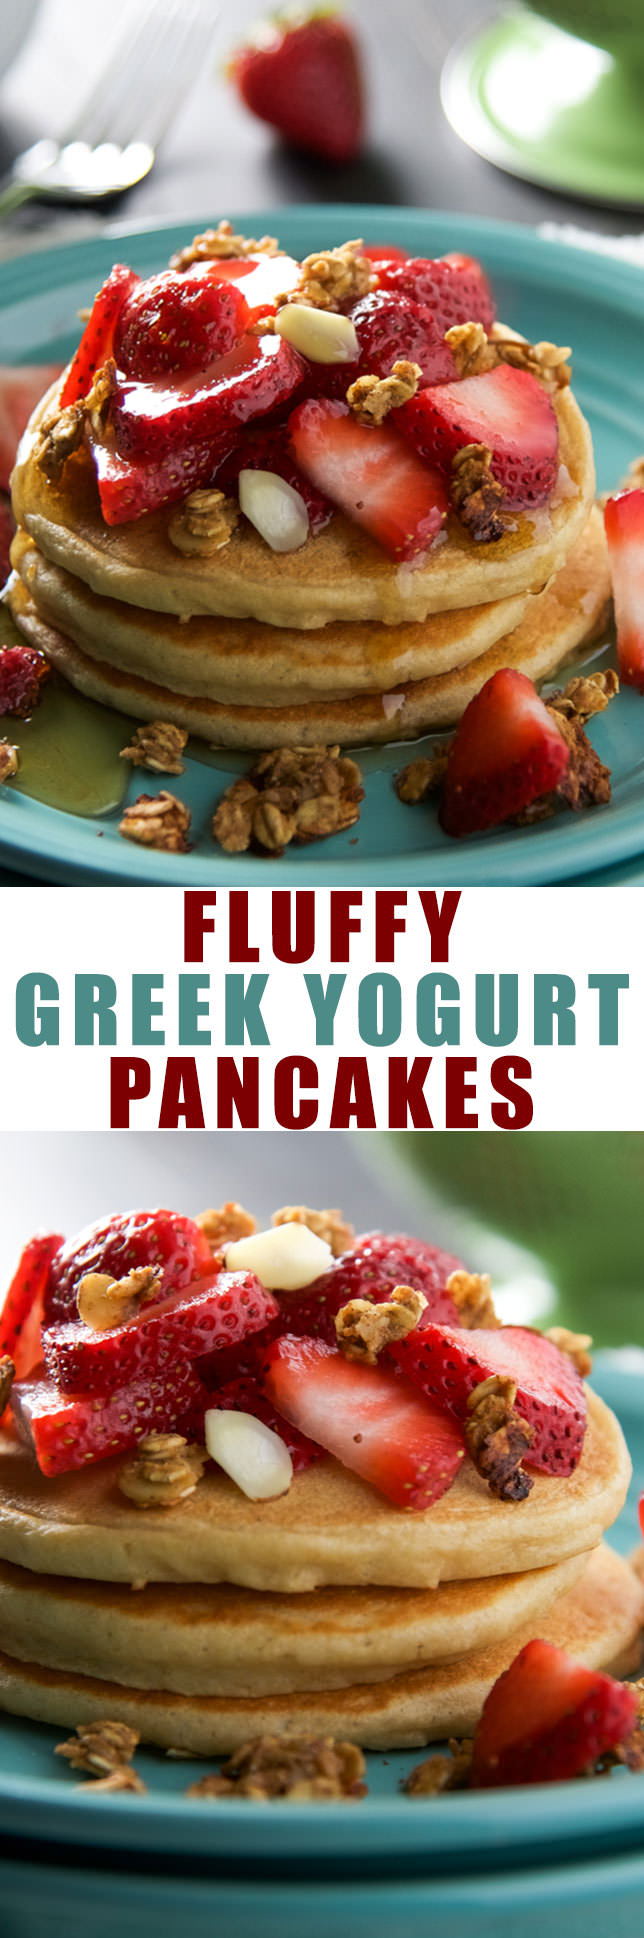 Fluffy and easy, healthy vanilla greek yogurt pancakes you can whip up quickly for a delicious, whole grain breakfast!